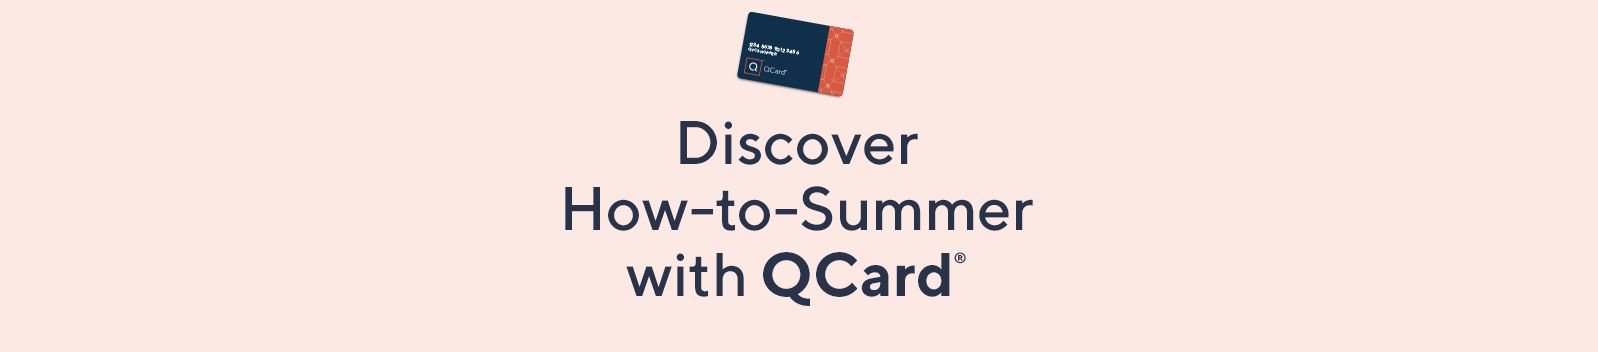 Discover How-to-Summer with QCard®